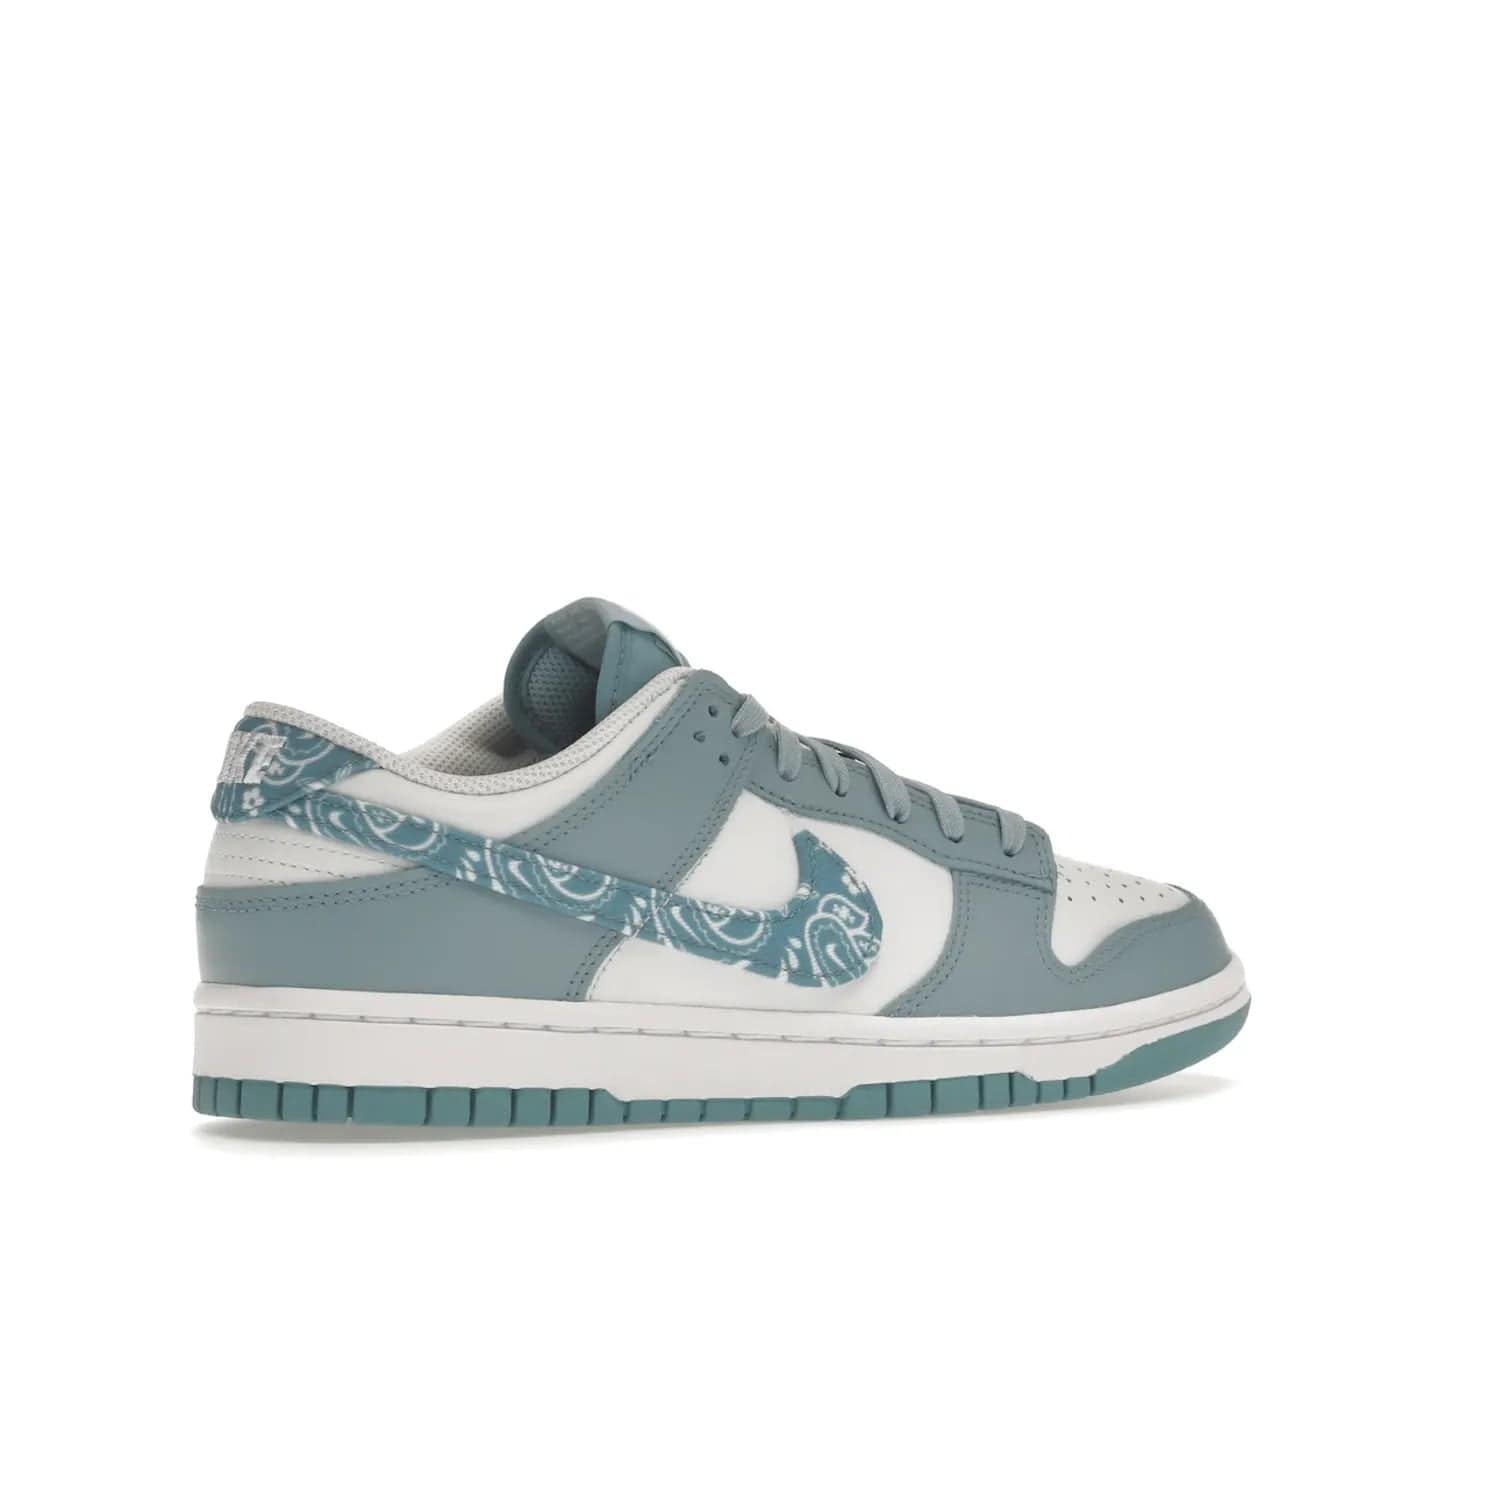 Nike Dunk Low Essential Paisley Pack Worn Blue (Women's) - Image 34 - Only at www.BallersClubKickz.com - Get the Nike Dunk Low Essential Paisley Pack Worn Blue (Women's) for style and comfort. White leather construction, light blue leather overlays, canvas Swooshes and matching heel tabs offer a rich blue hue. Finished by a white and light blue sole, this classic Nike Dunk is the perfect addition to any wardrobe. Released in March 2022.